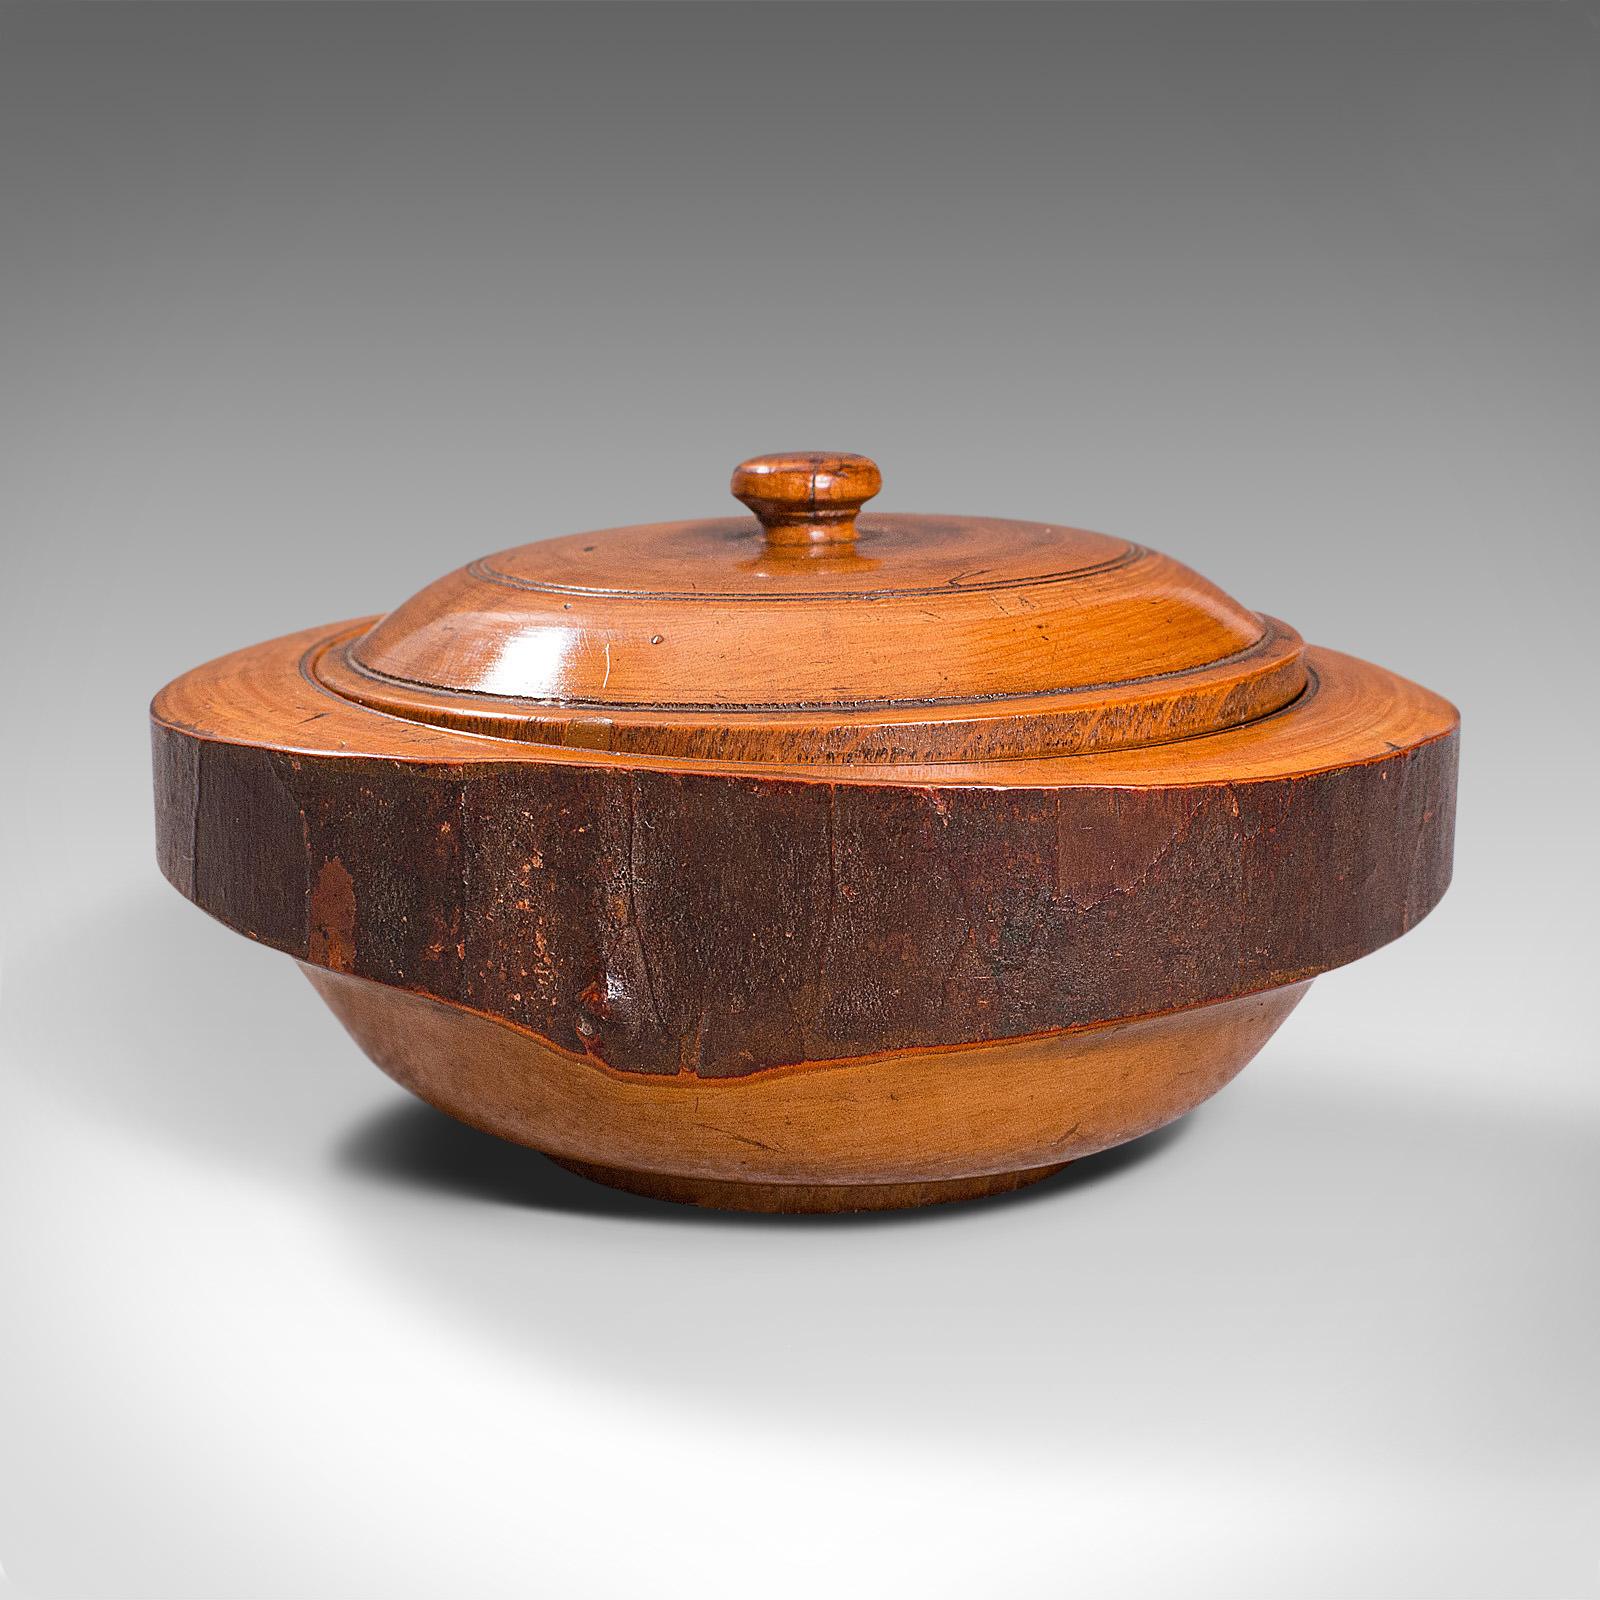 British Pair of Antique Carved Lidded Bowls, Treen, English, Yew, Victorian, circa 1900 For Sale